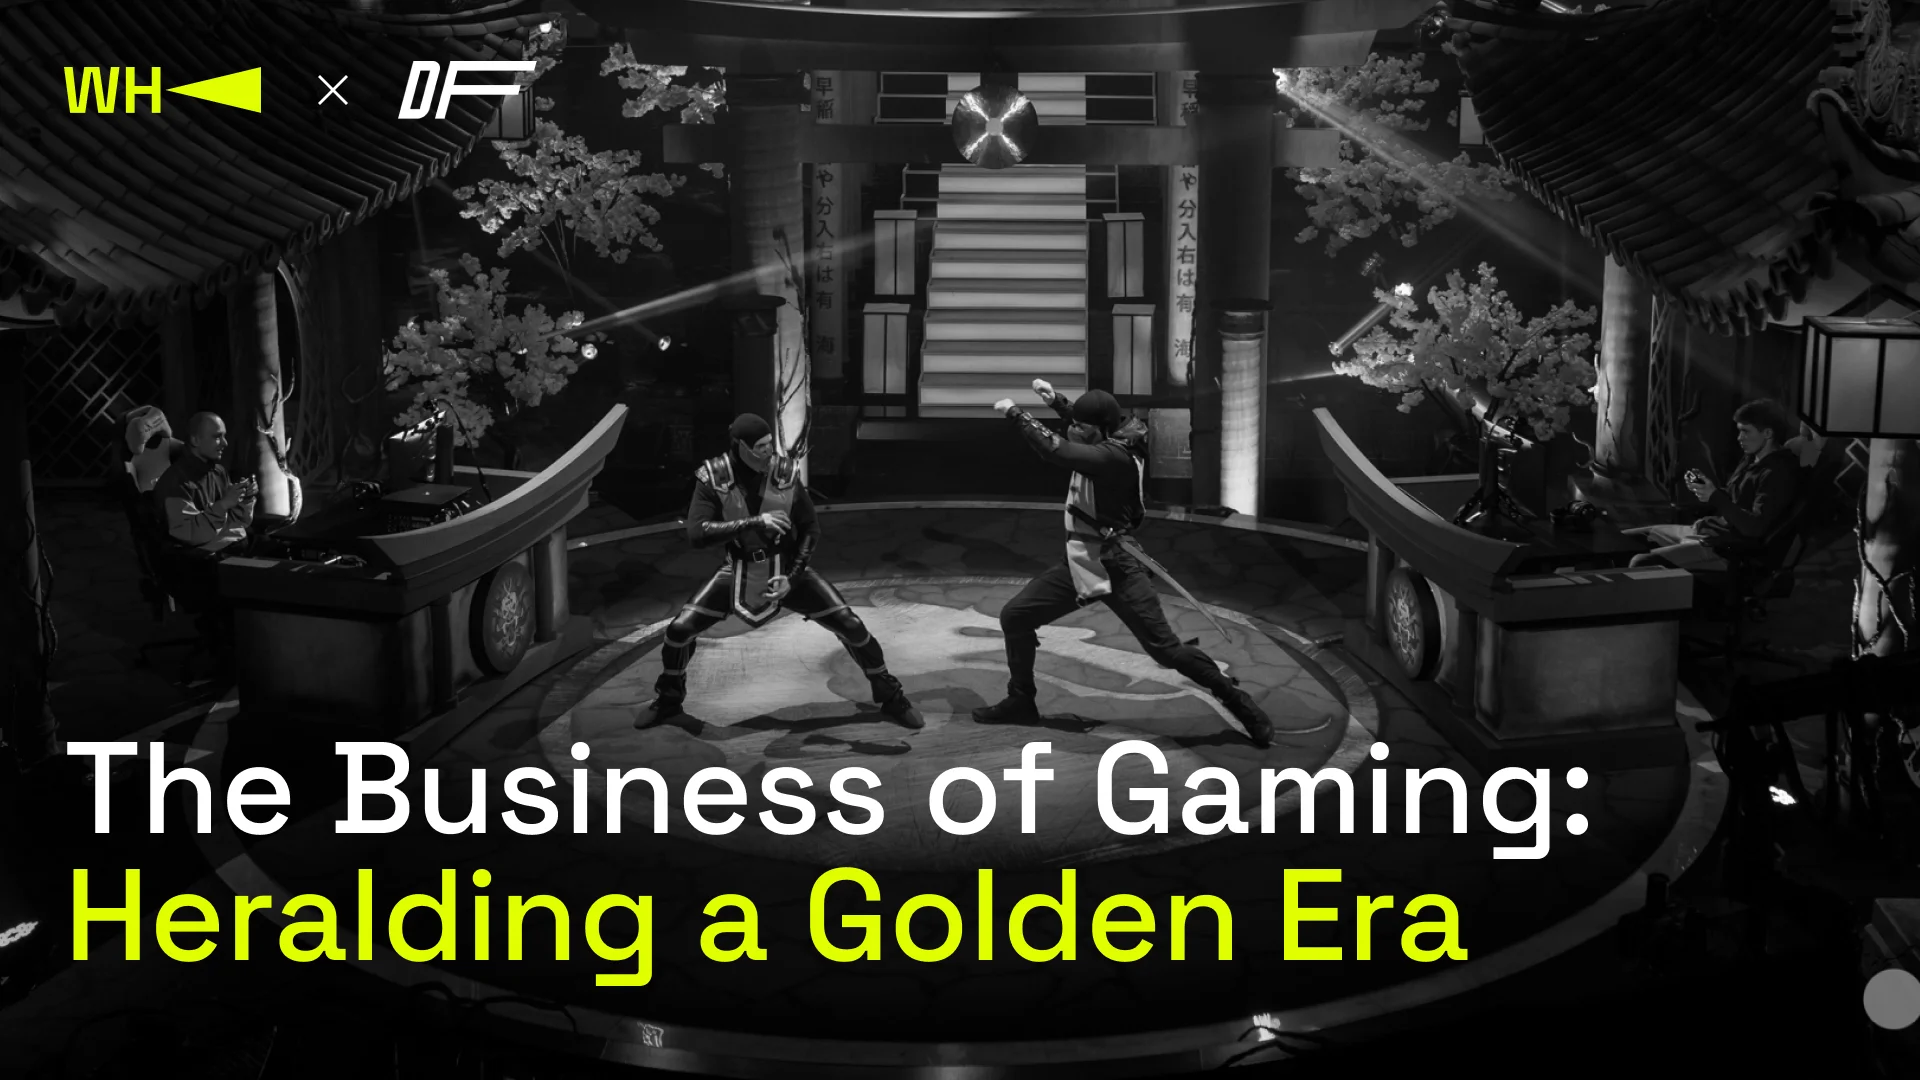 The Business of Gaming Heralding a Golden Era. Credit: WePlay Holding